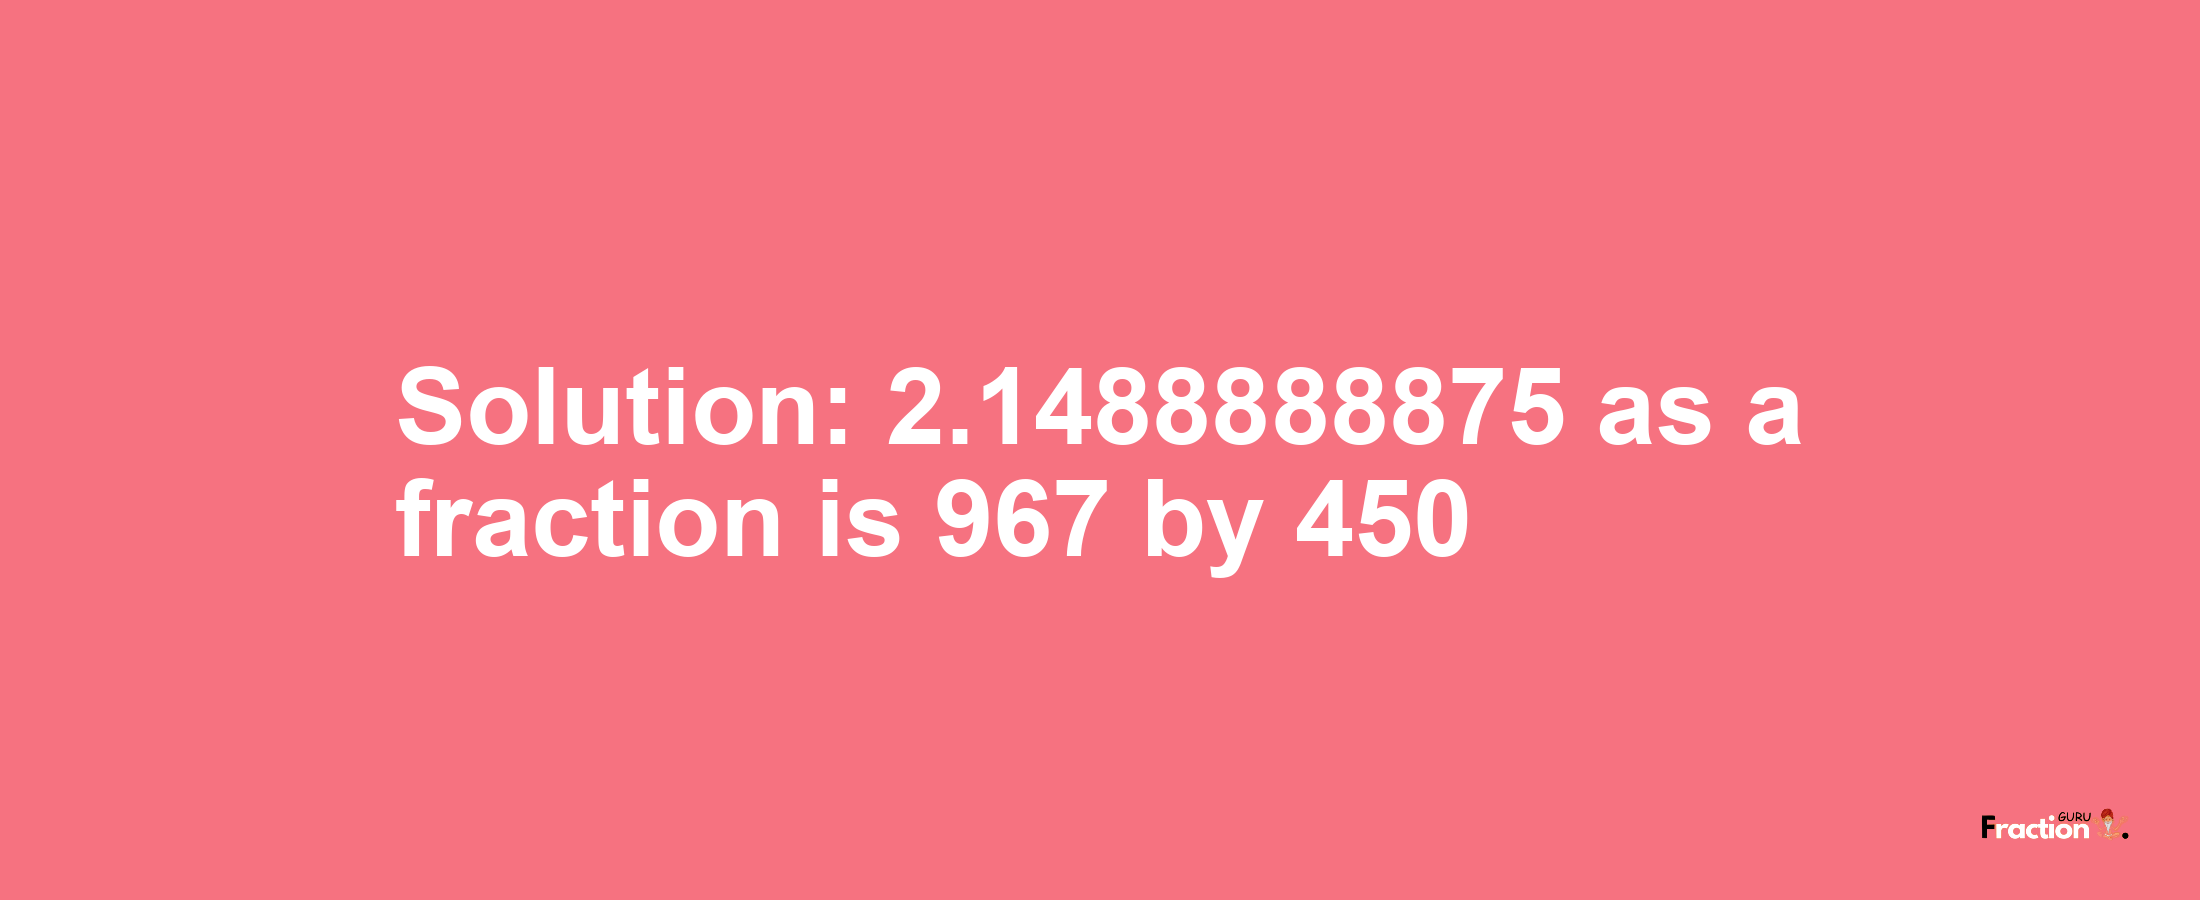 Solution:2.1488888875 as a fraction is 967/450